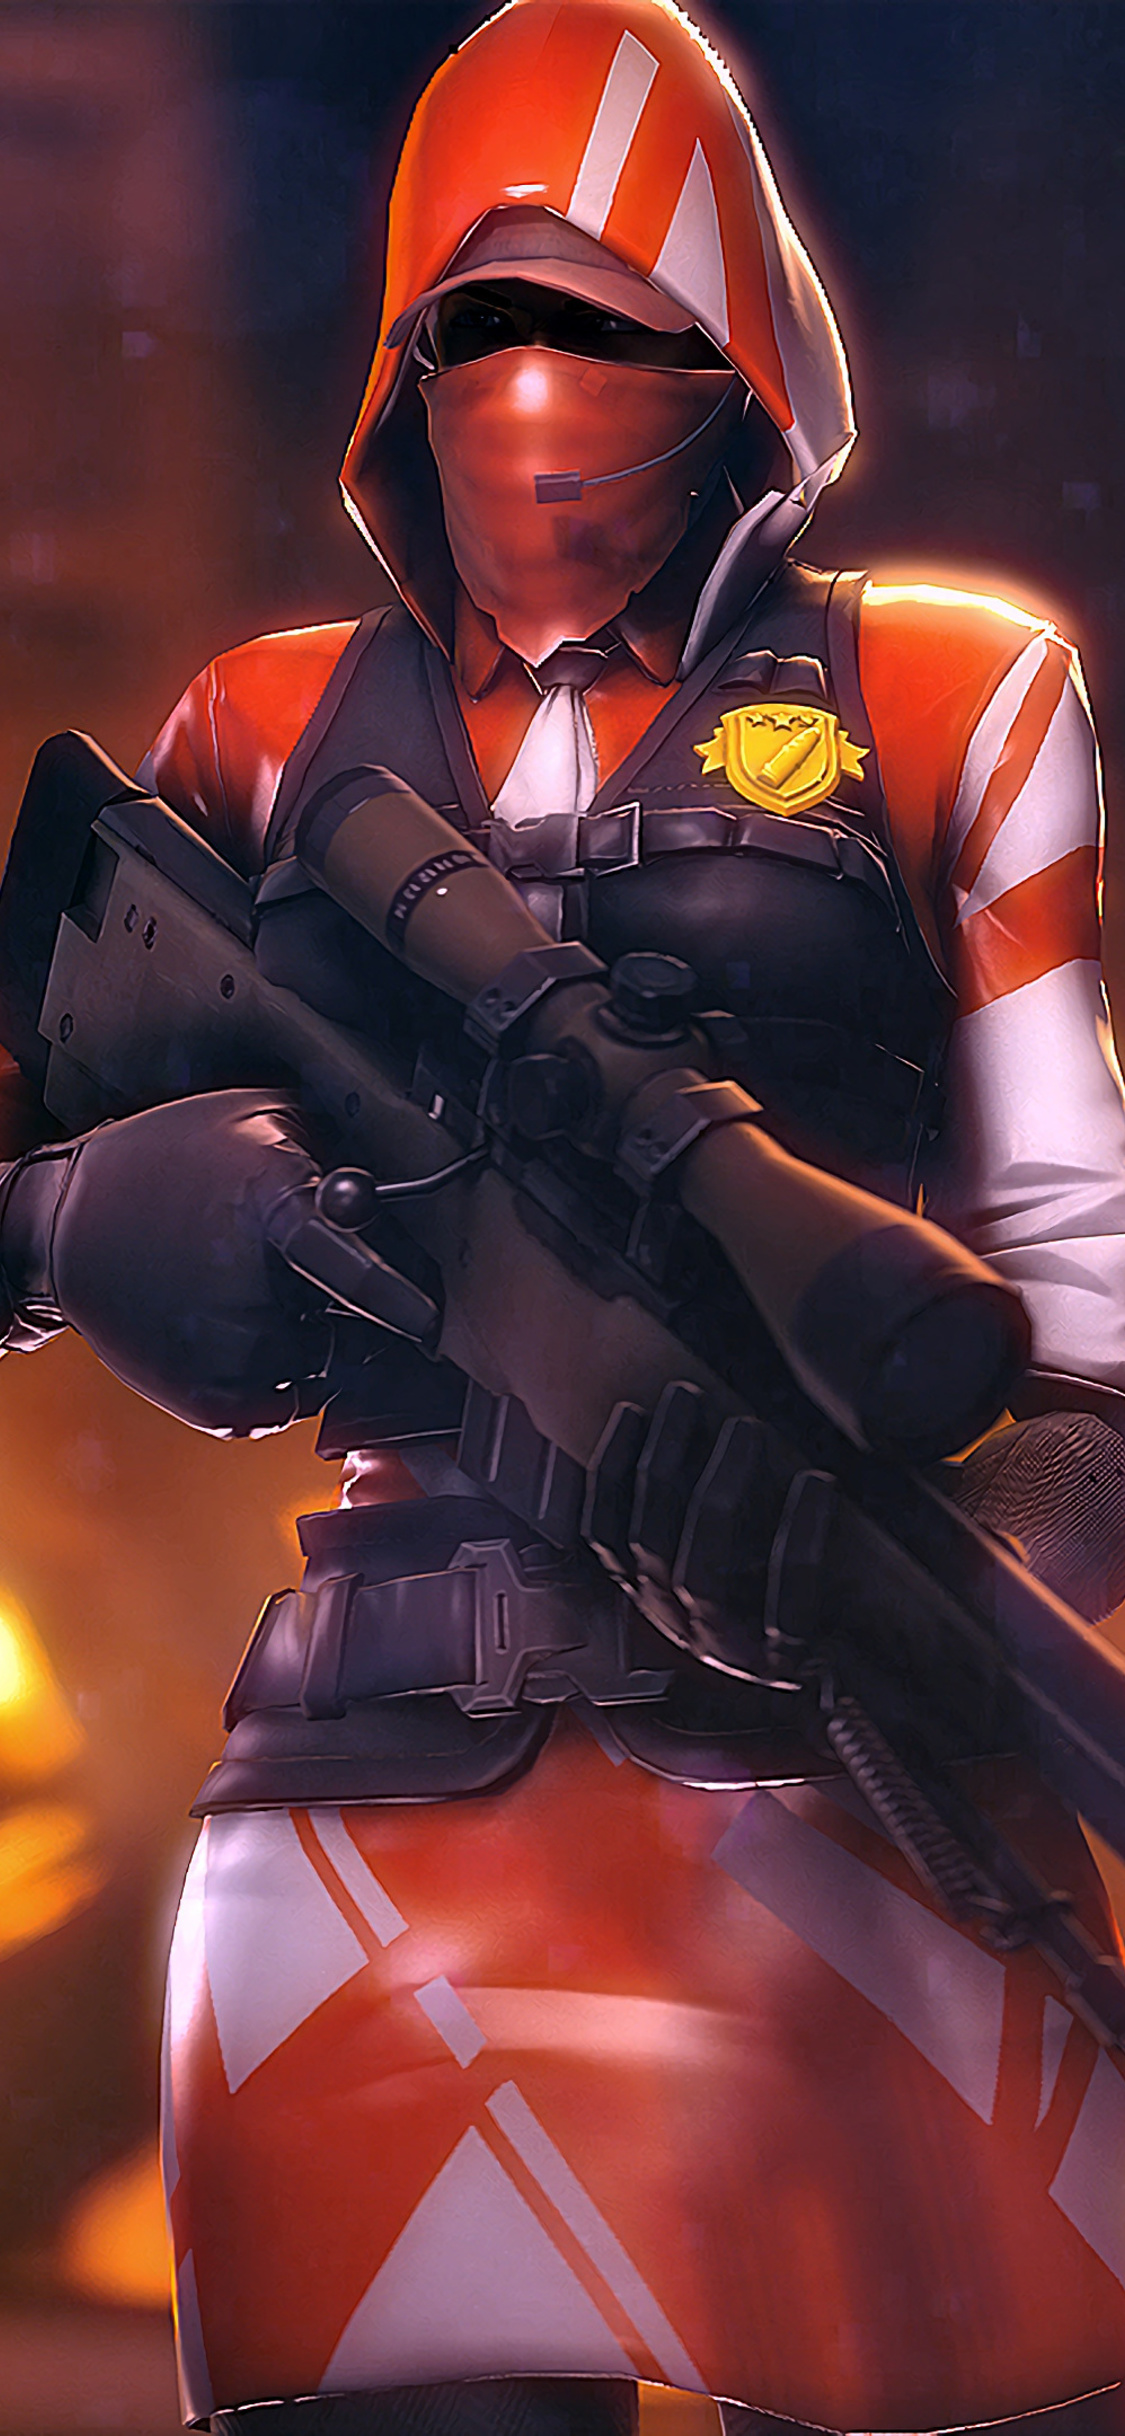 ace sniper outfit fortnite iphone background 4298 wallpapers and 1125x2436 - fortnite wallpaper for ipod touch